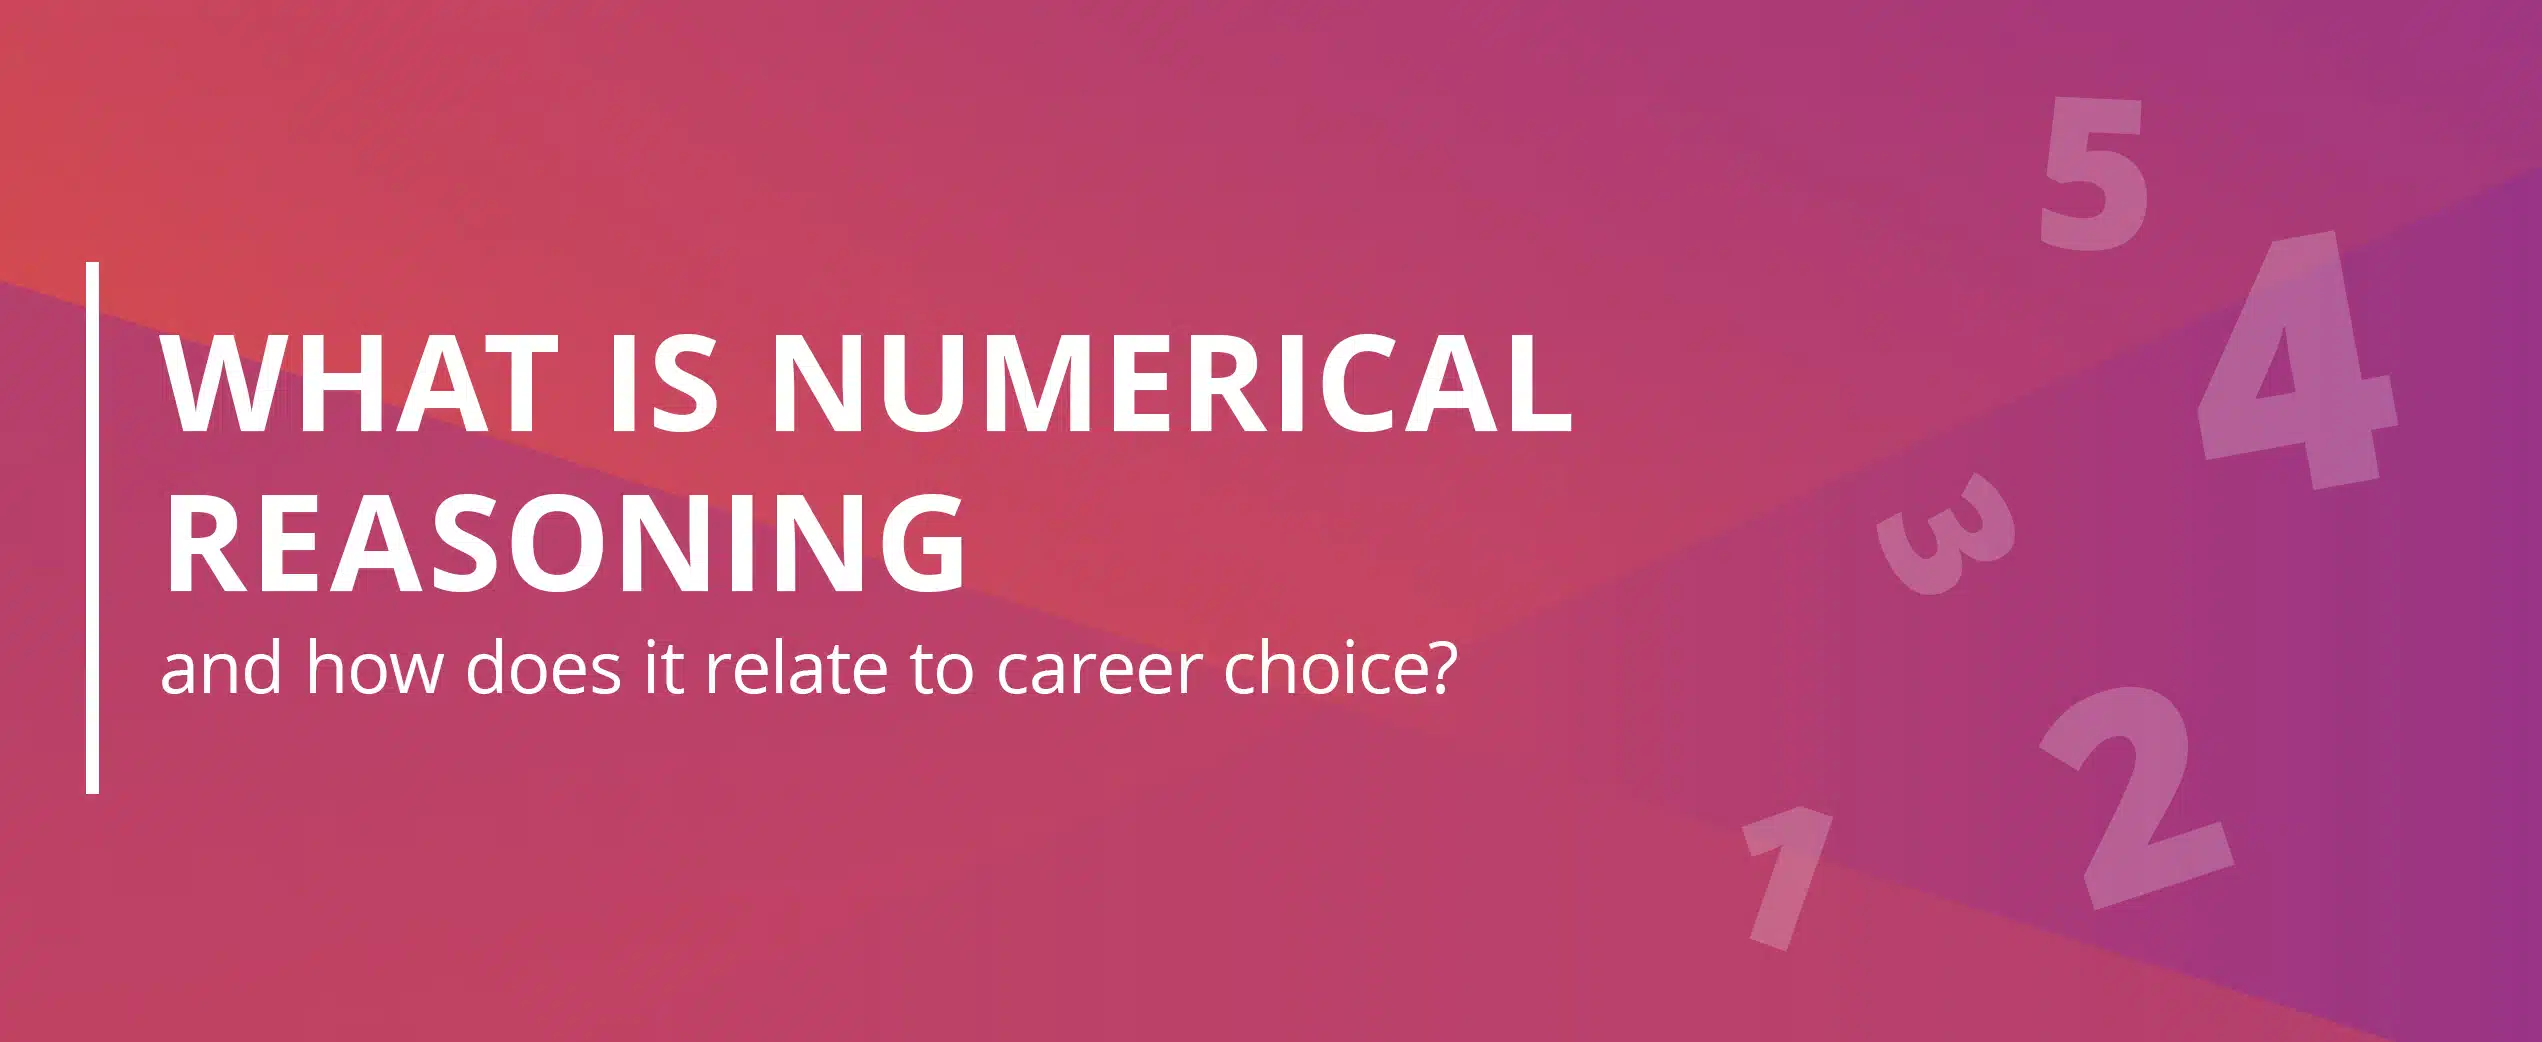 What is numerical reasoning and how does it relate to career choice?